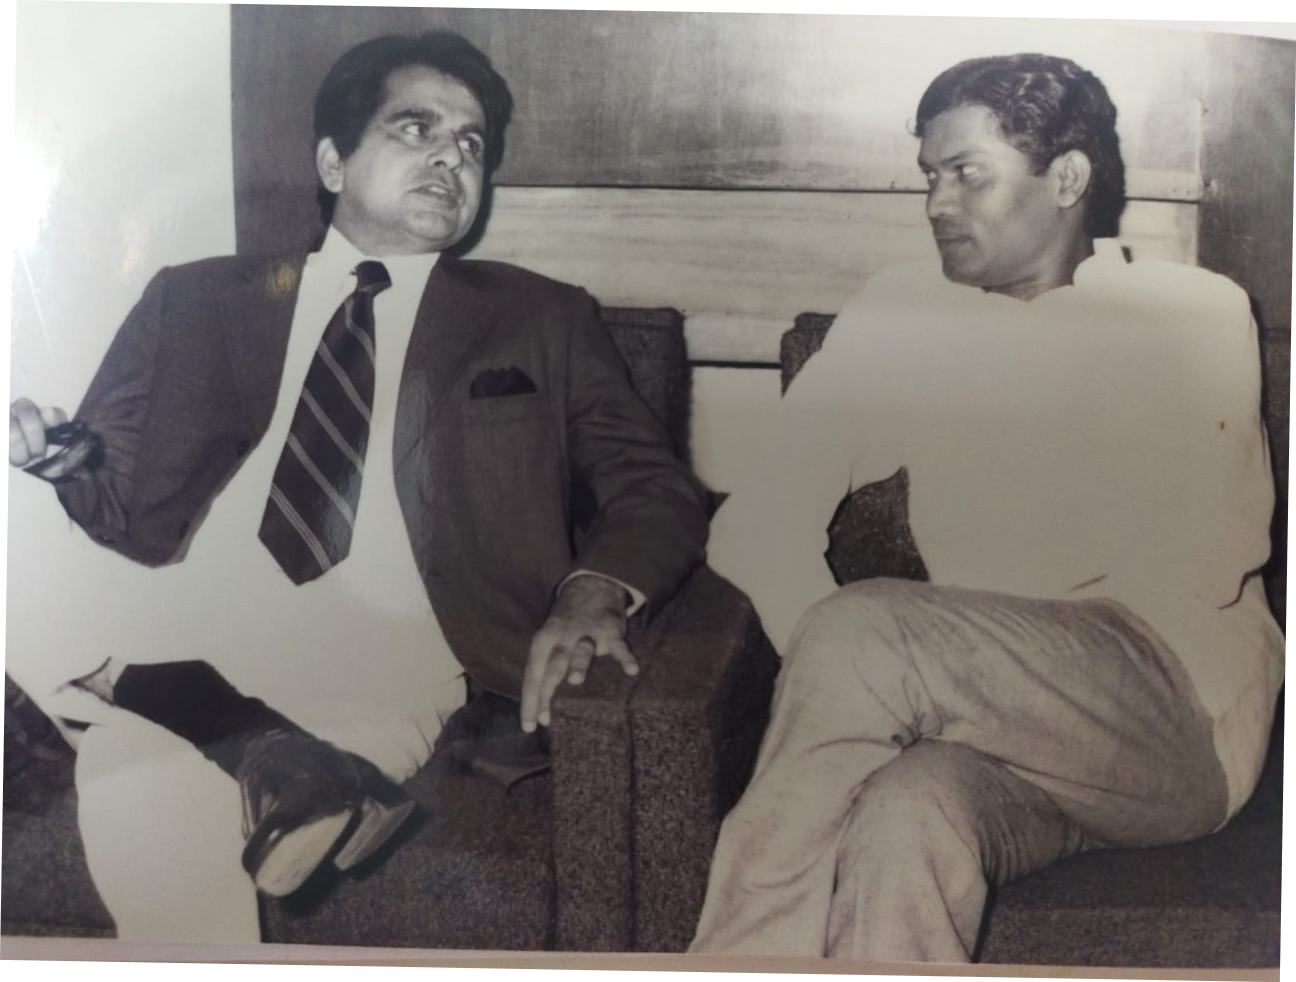 former-union-minister-arvind-netam-shares-memories-of-his-and-dilip-kumar-friendship-with-etv-bharat-in-raipur